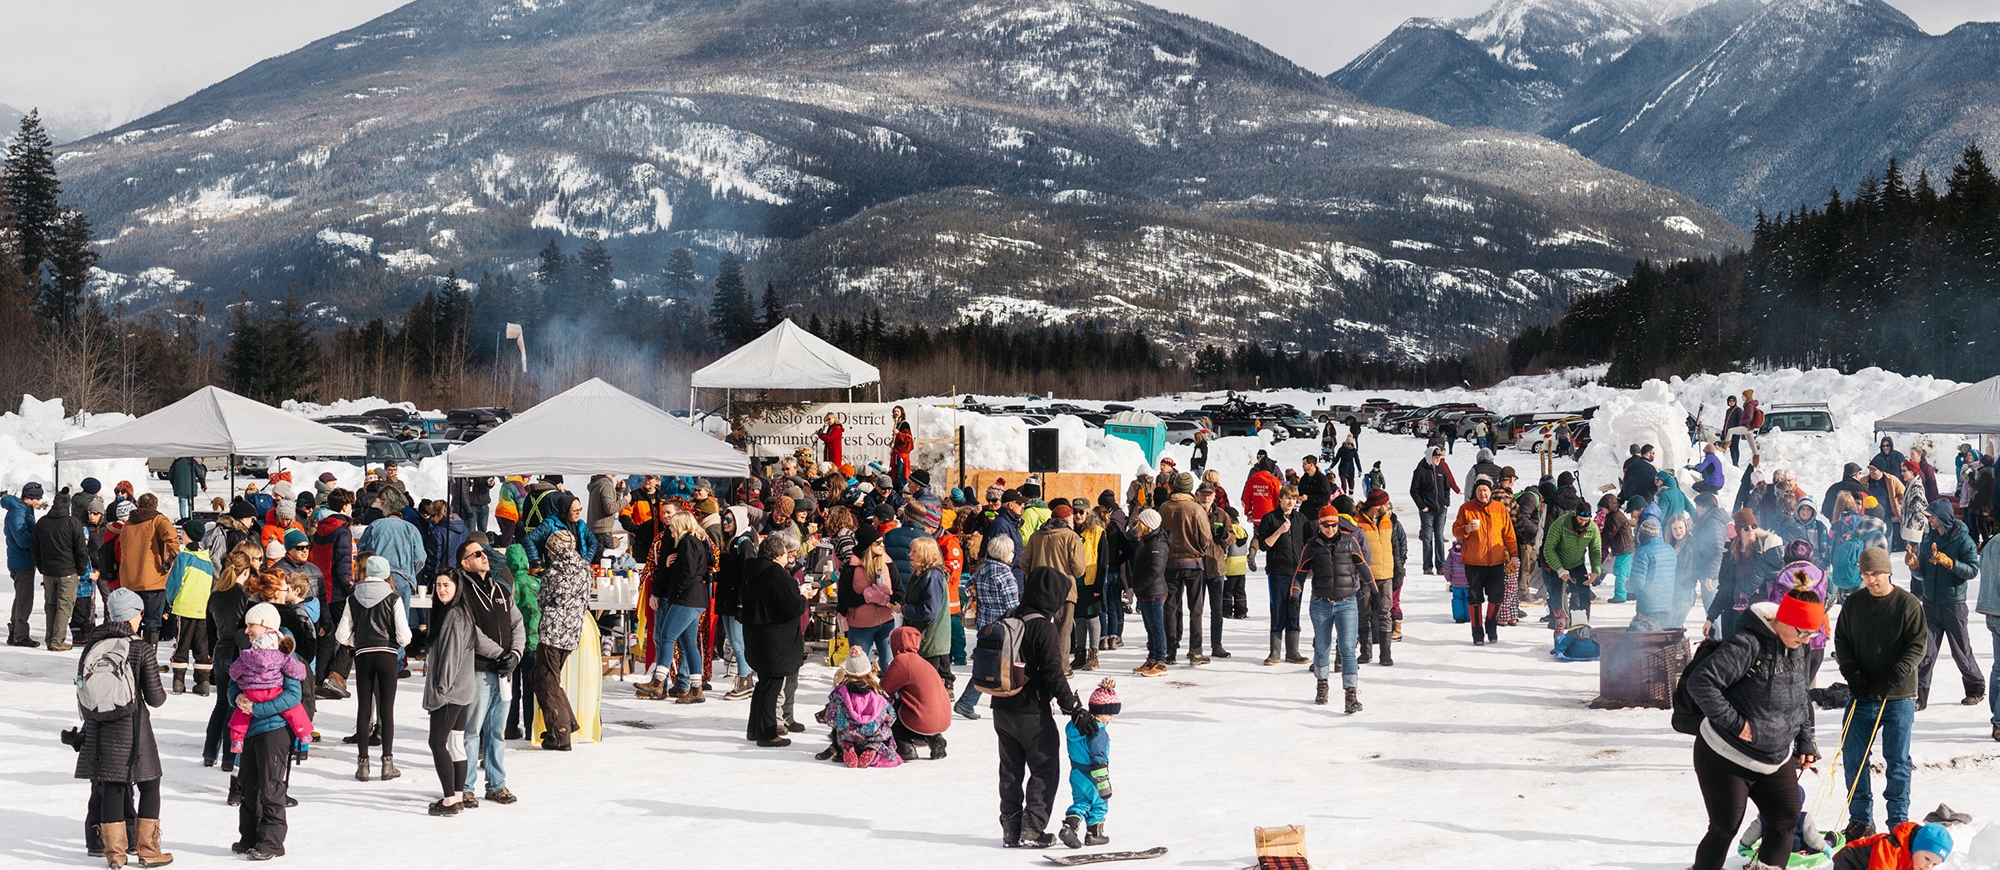 Enjoy winter in Kaslo, BC at the Winter in the Forest Festival